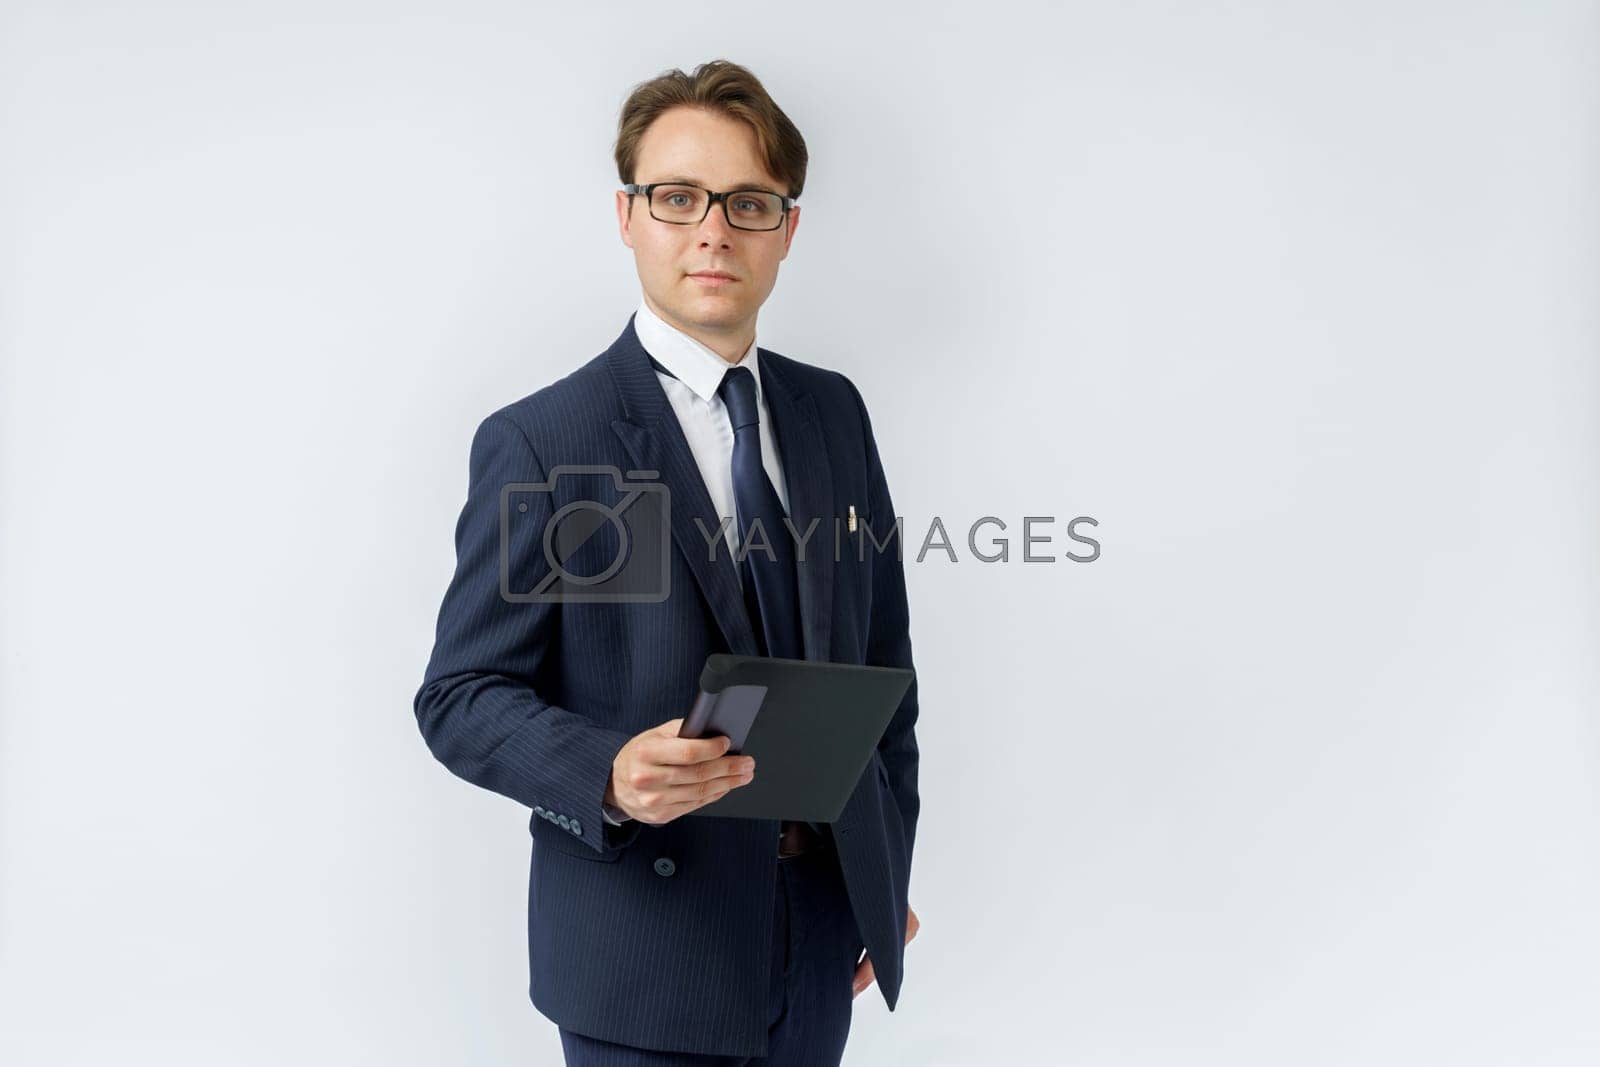 Royalty free image of Portrait of a businessman in a blue suit holding an electronic tablet on a white background. by Sd28DimoN_1976